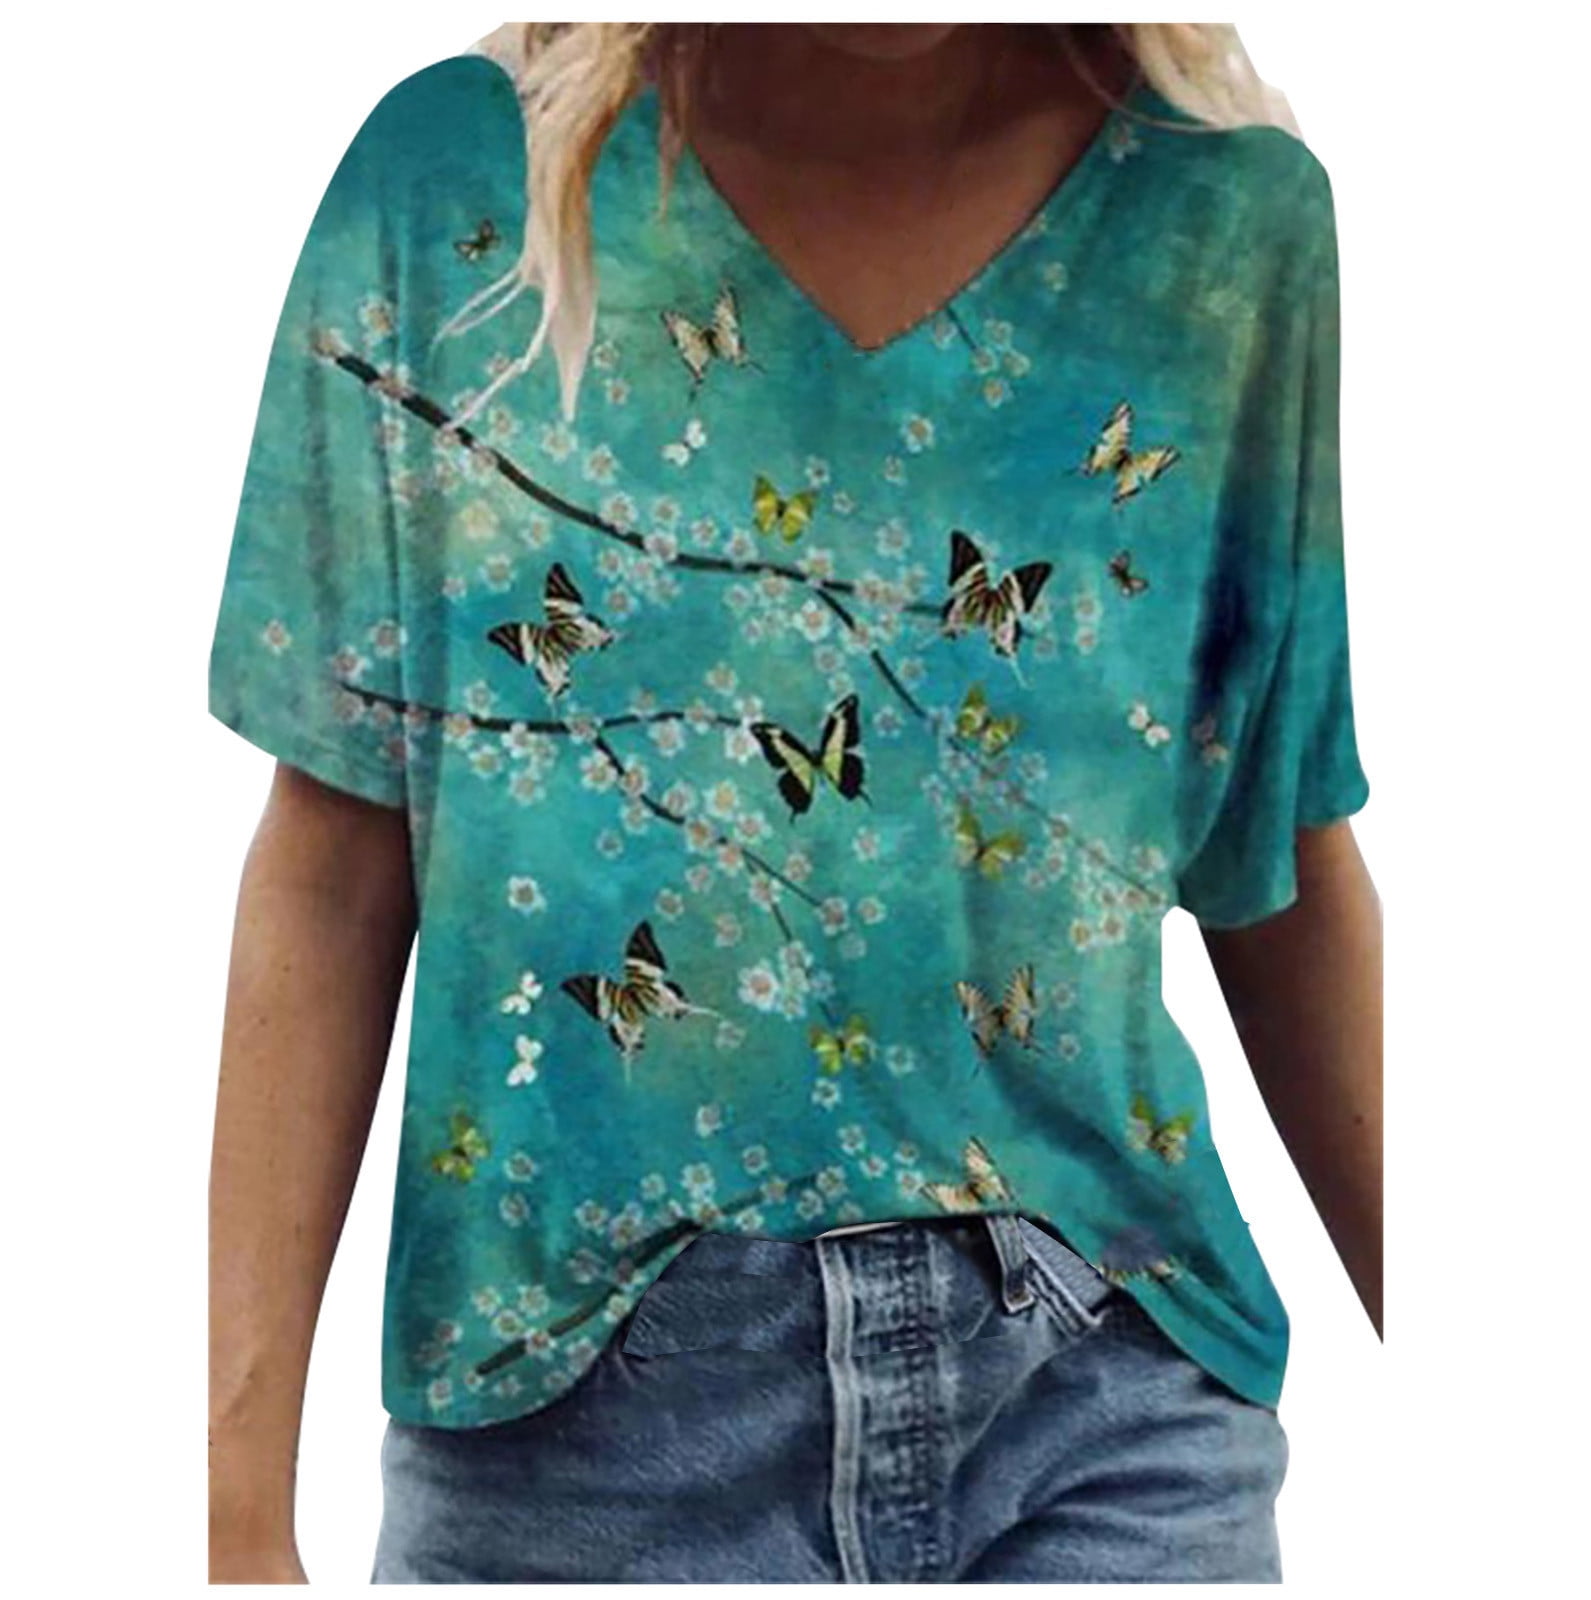 JGGSPWM Tie Dye Butterfly Graphic Shirts Succulents Floral Print Short ...